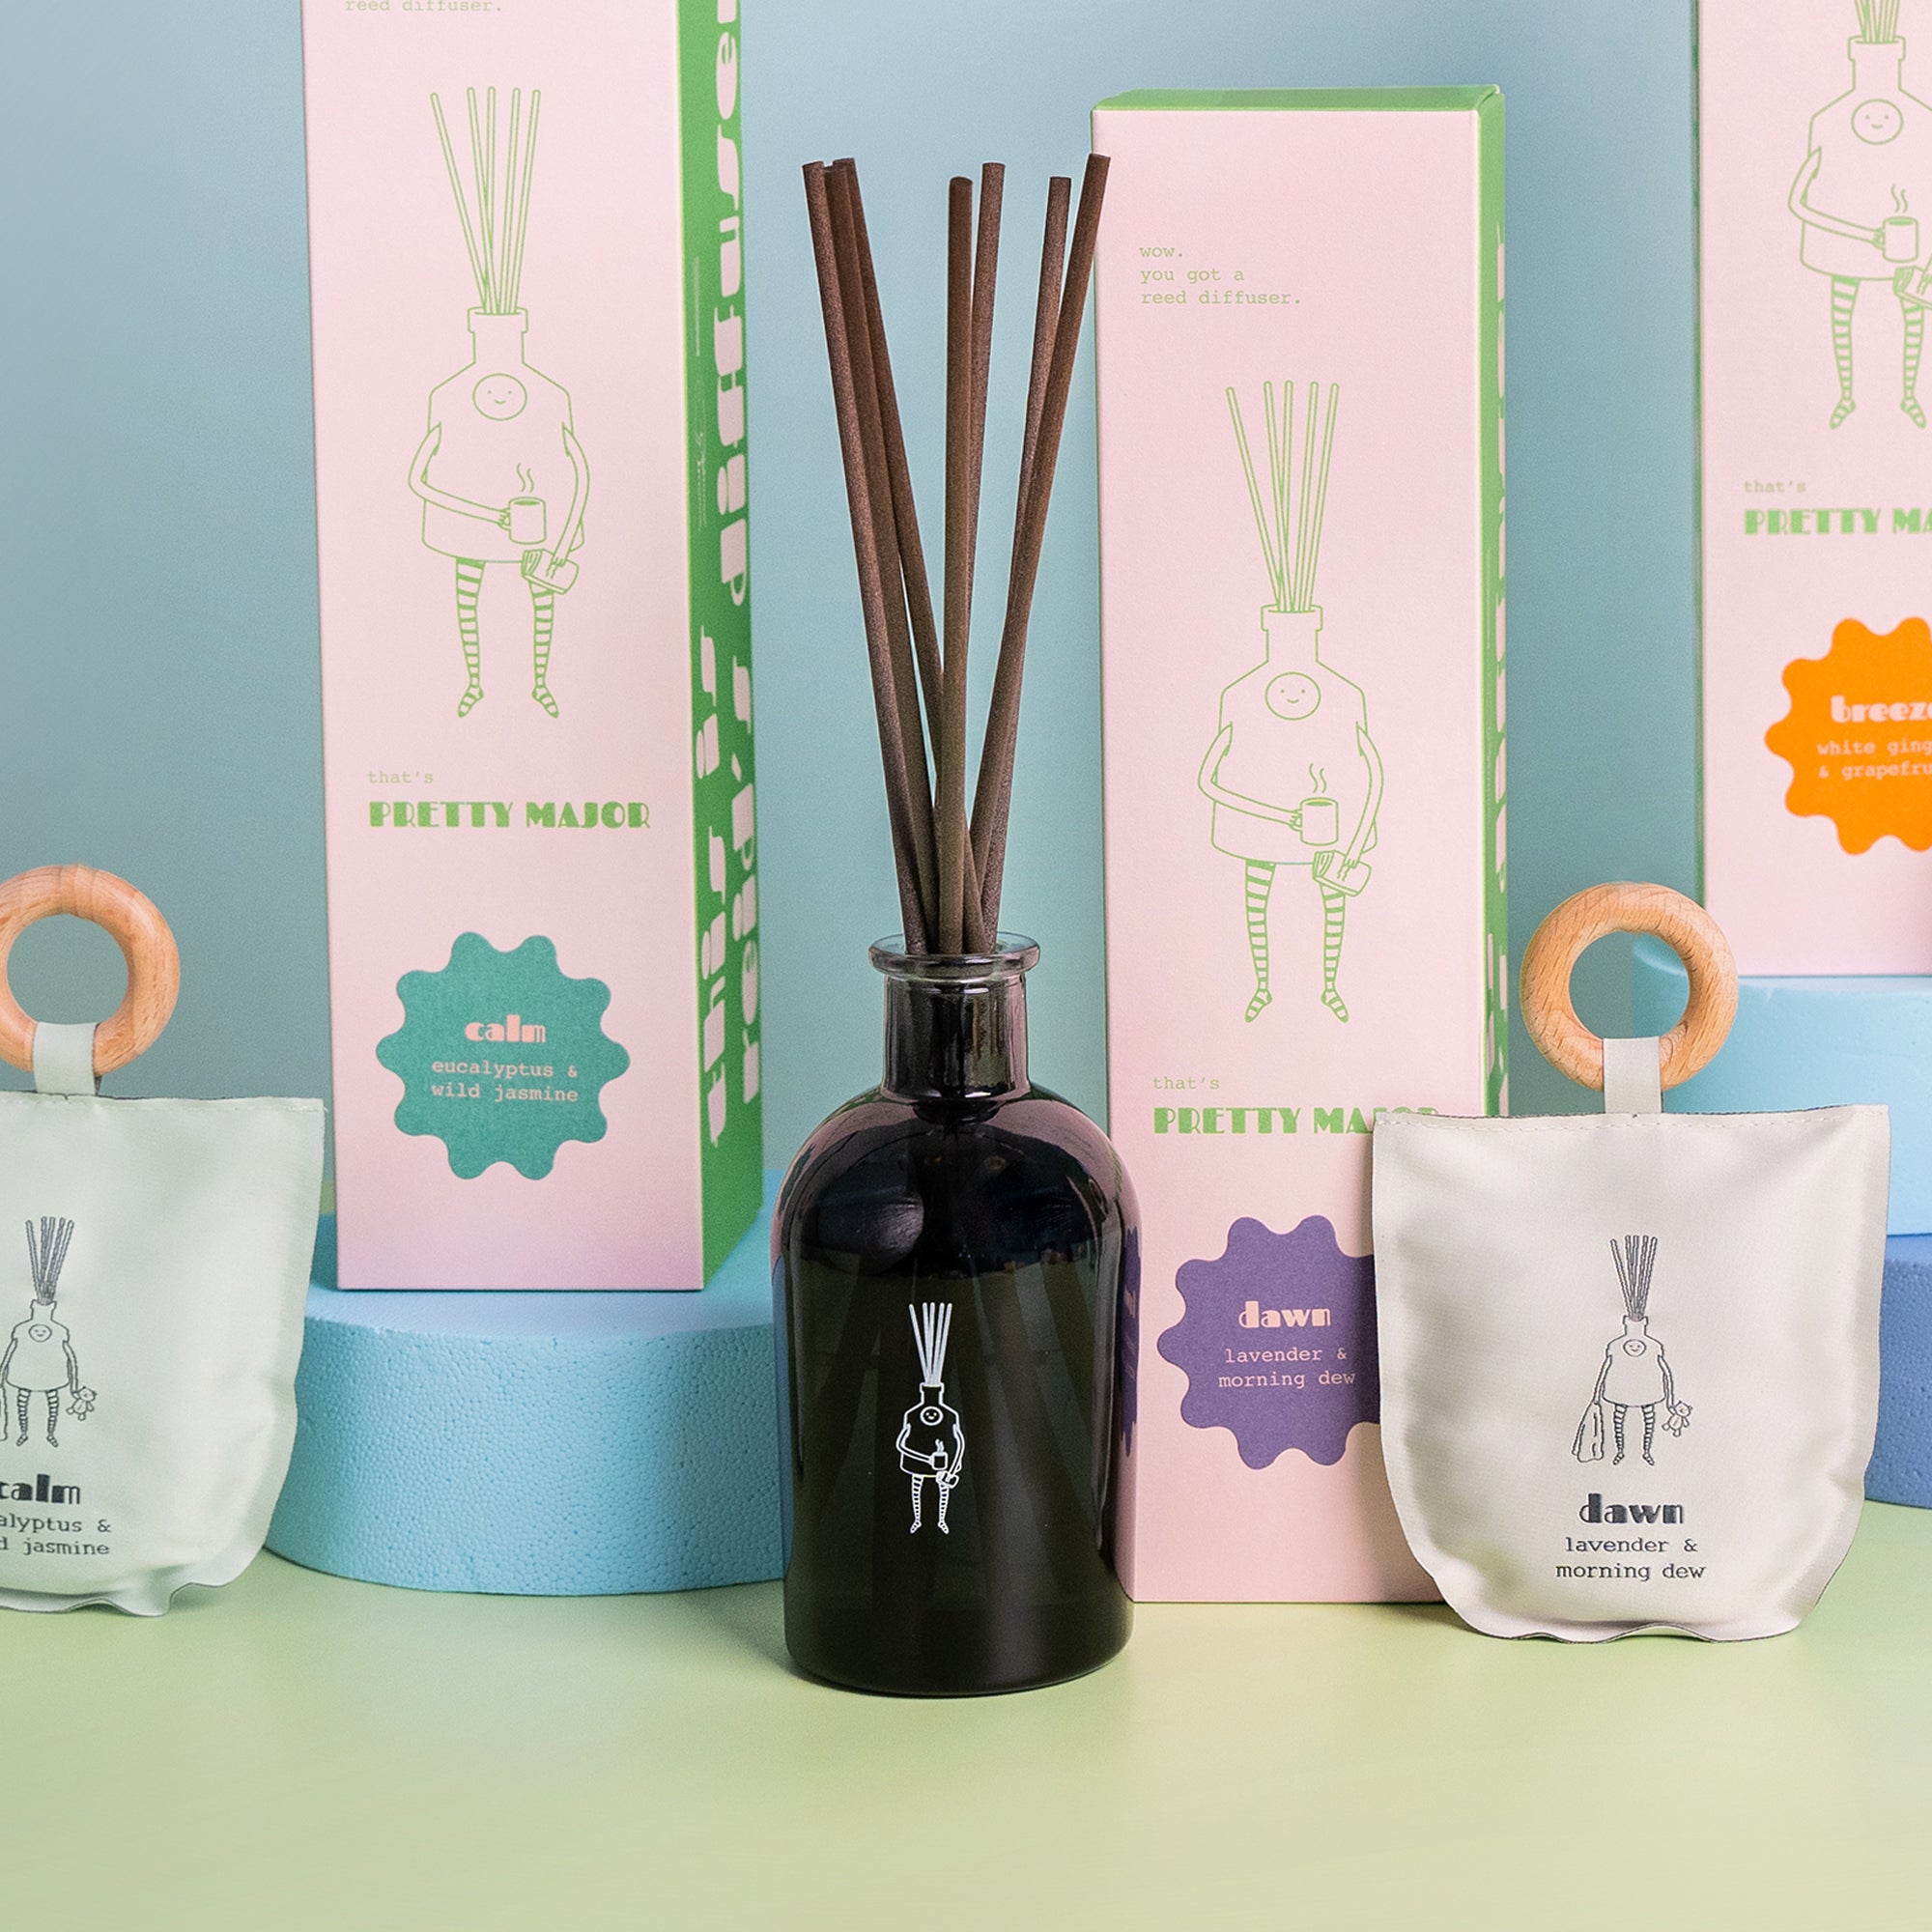 pretty major home fragrance scent diffuser with scented sachet and reed diffuser